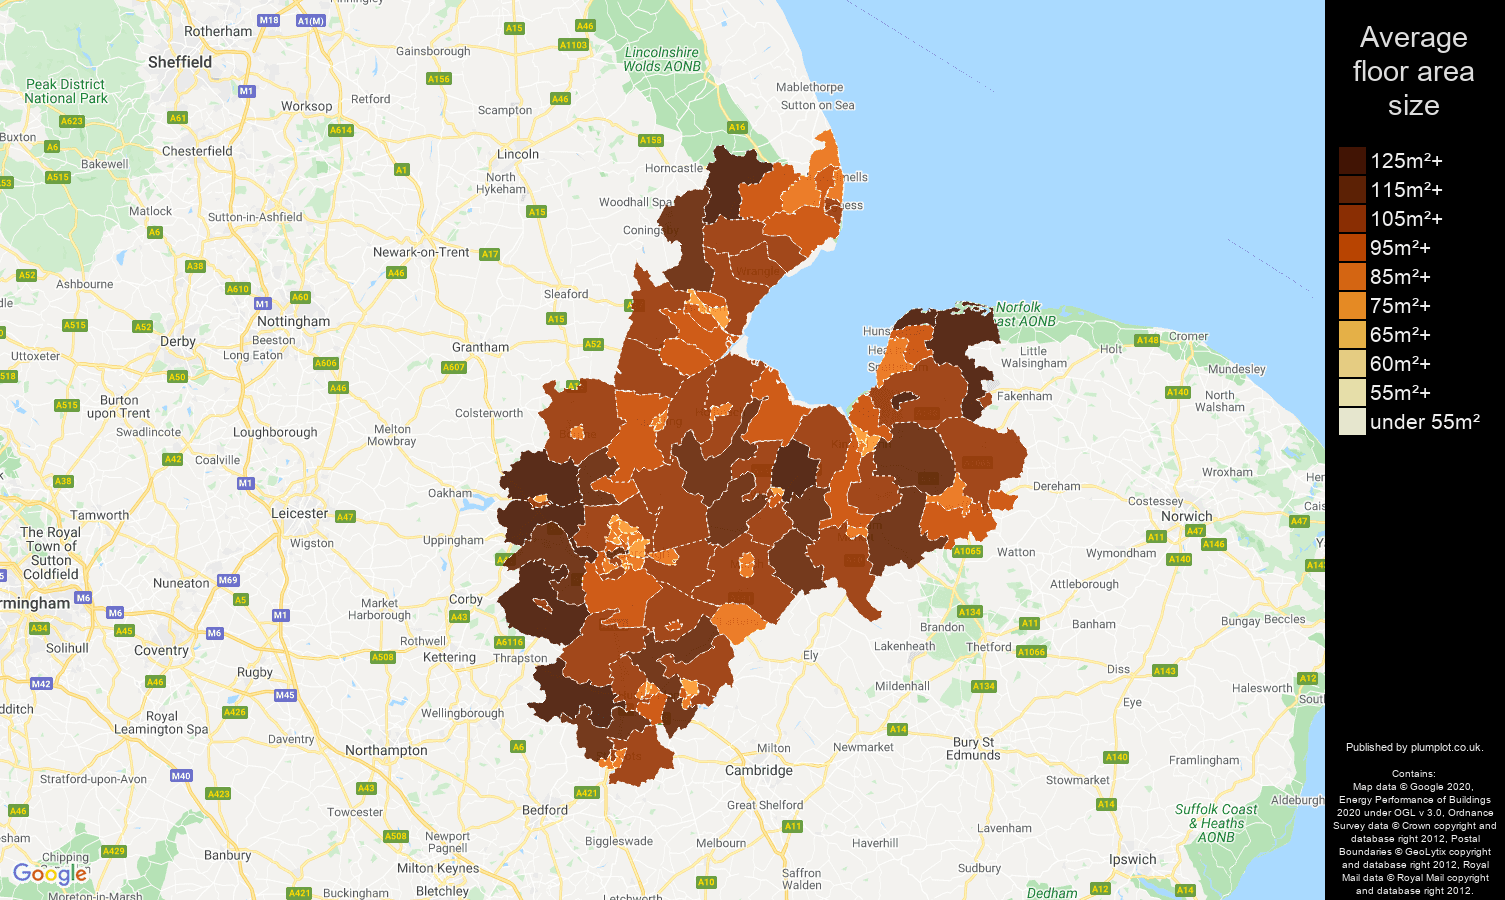 Peterborough map of average floor area size of houses